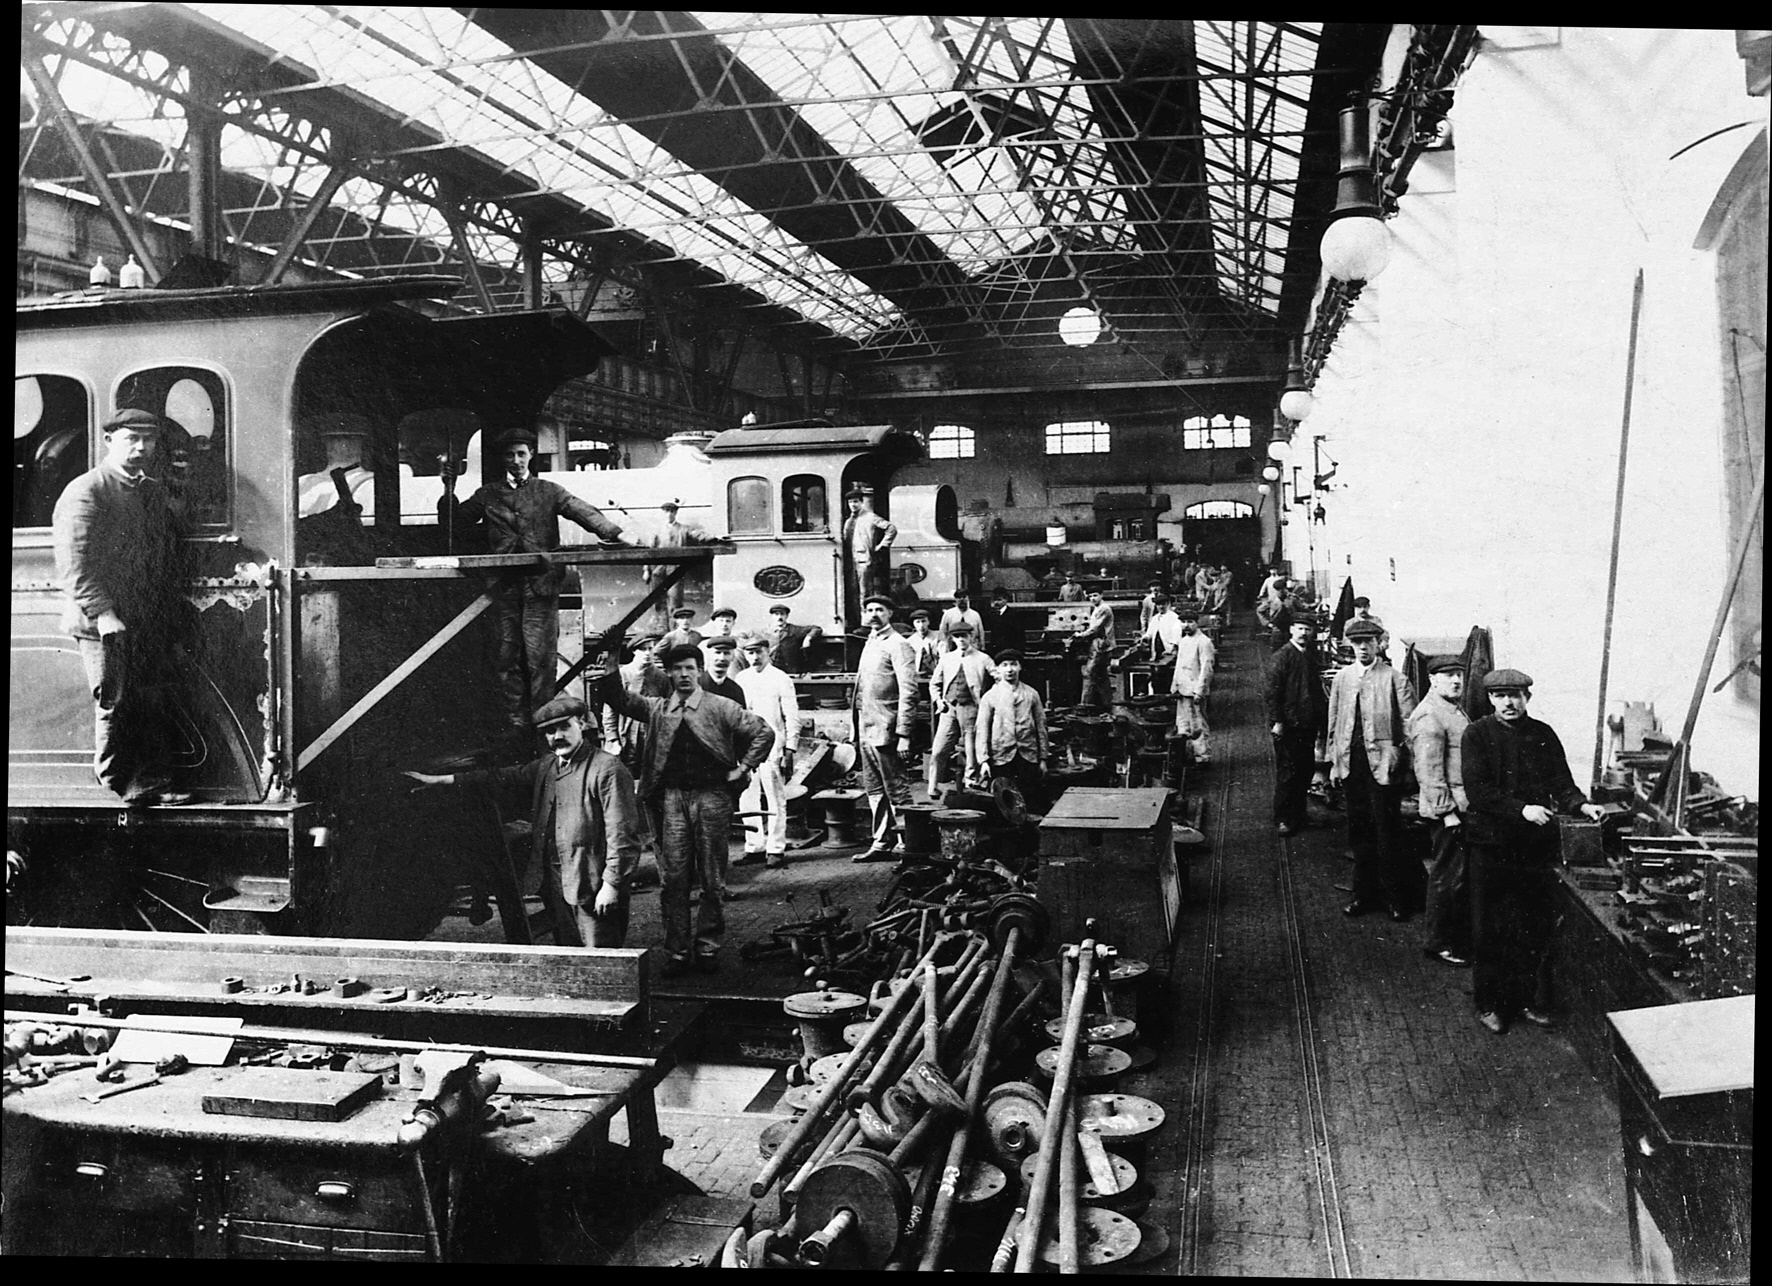 Inside the North Road Locomotive Works during the First World War